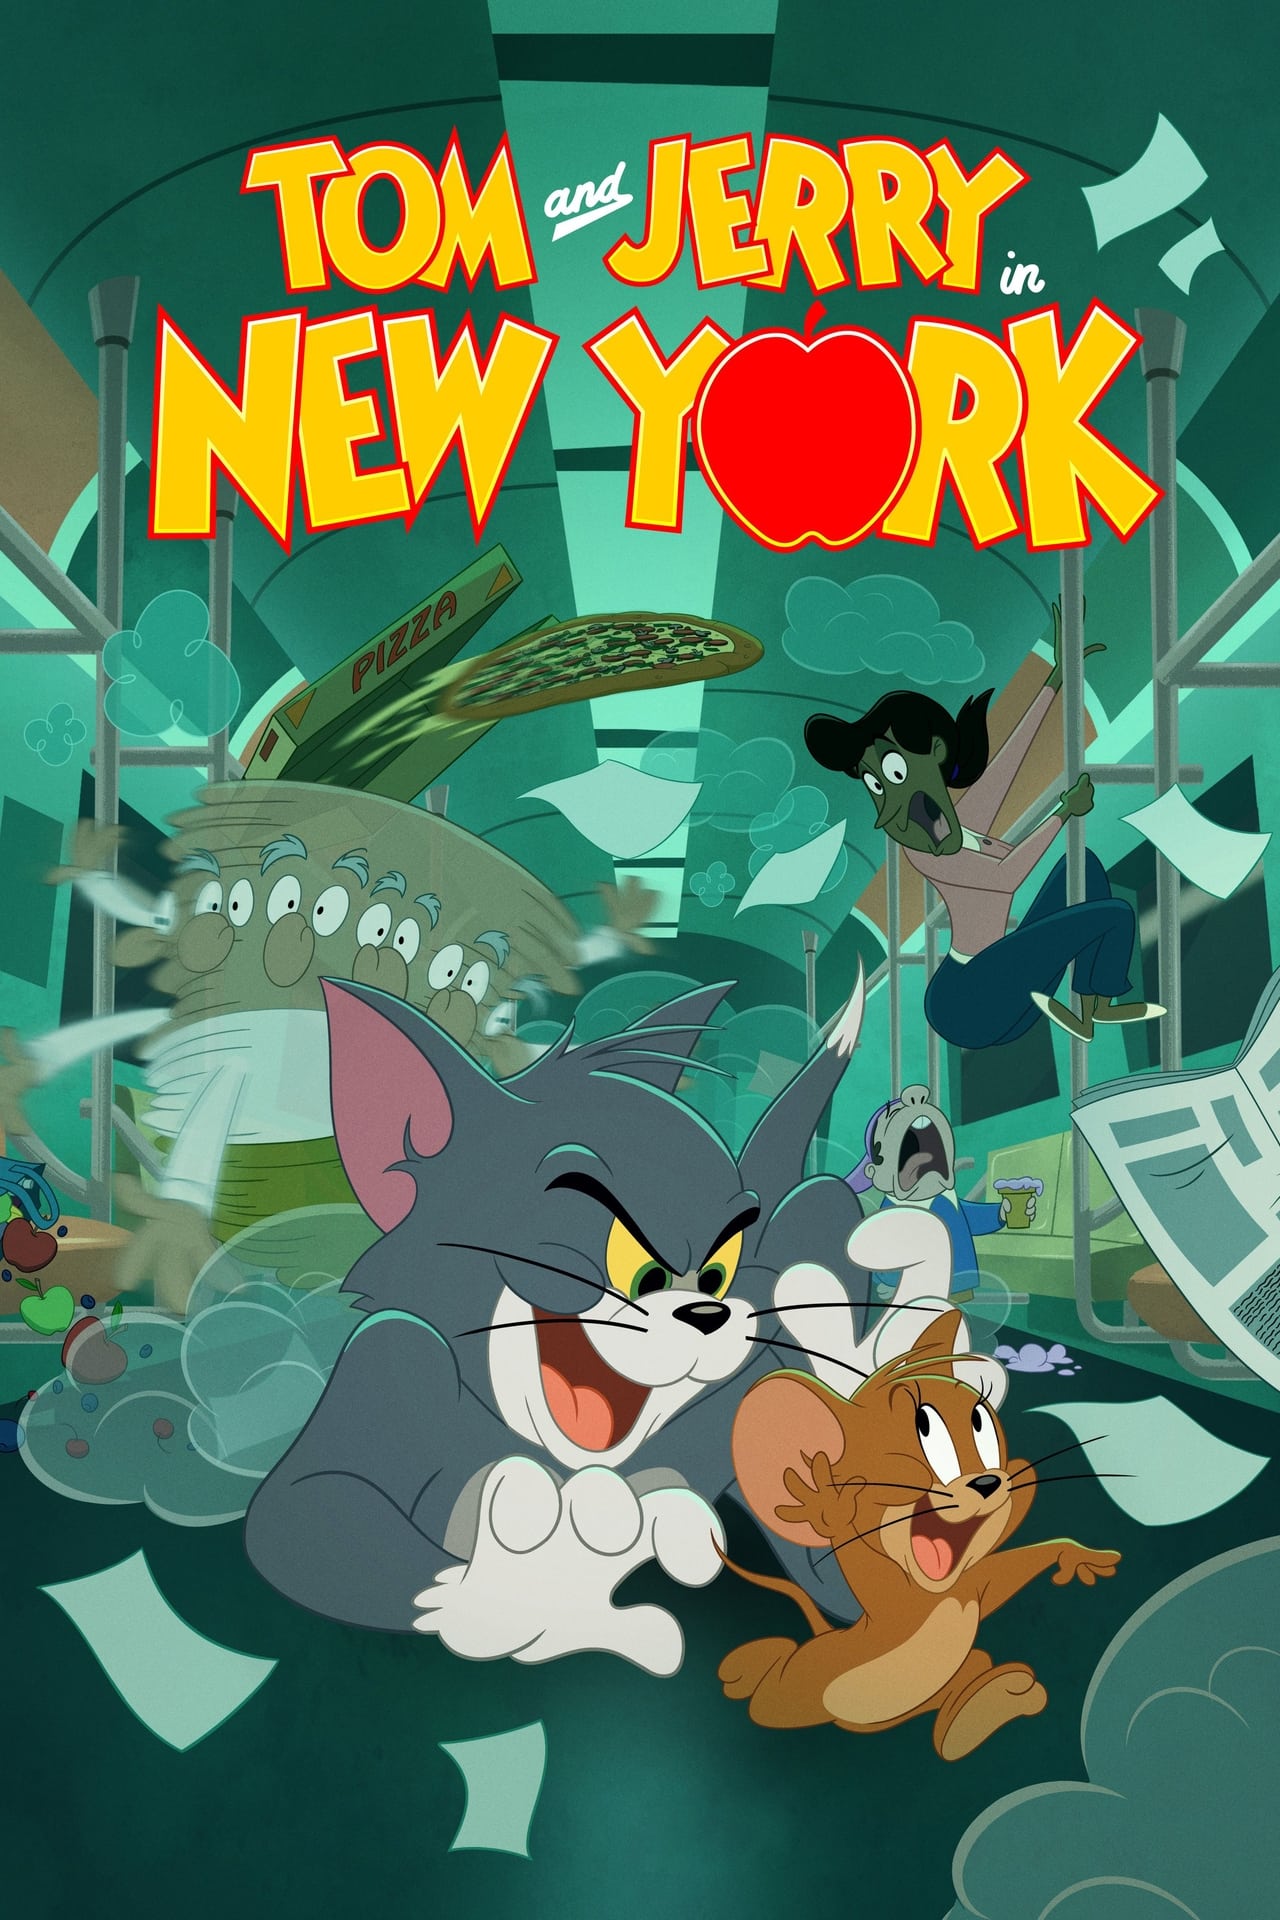 Tom and Jerry in New York (season 1)